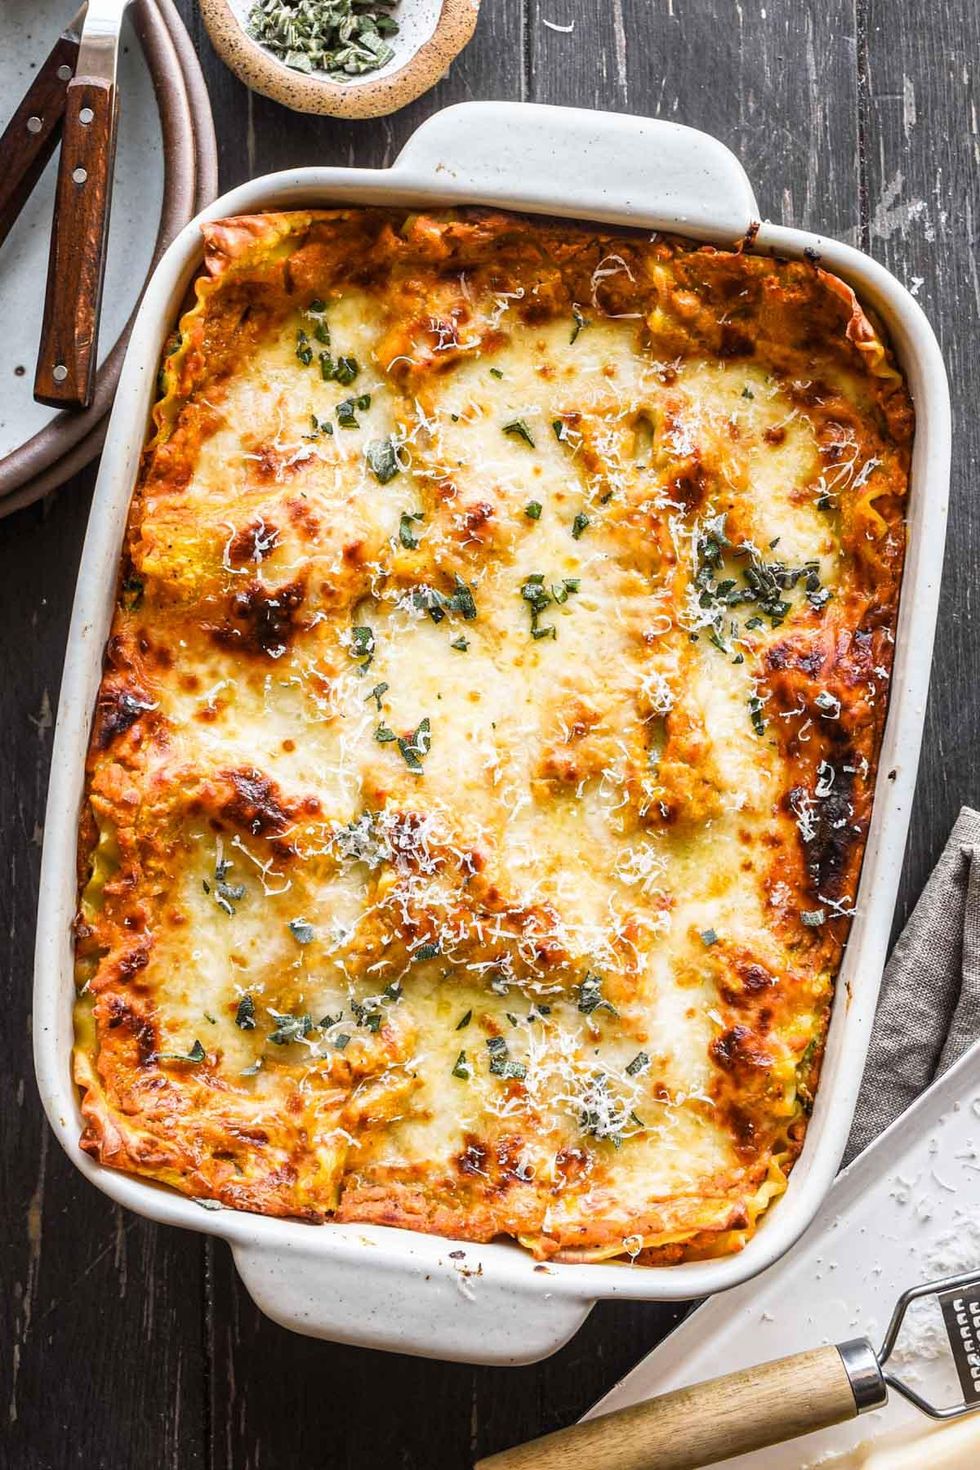 BUTTERNUT SQUASH AND SPINACH LASAGNA